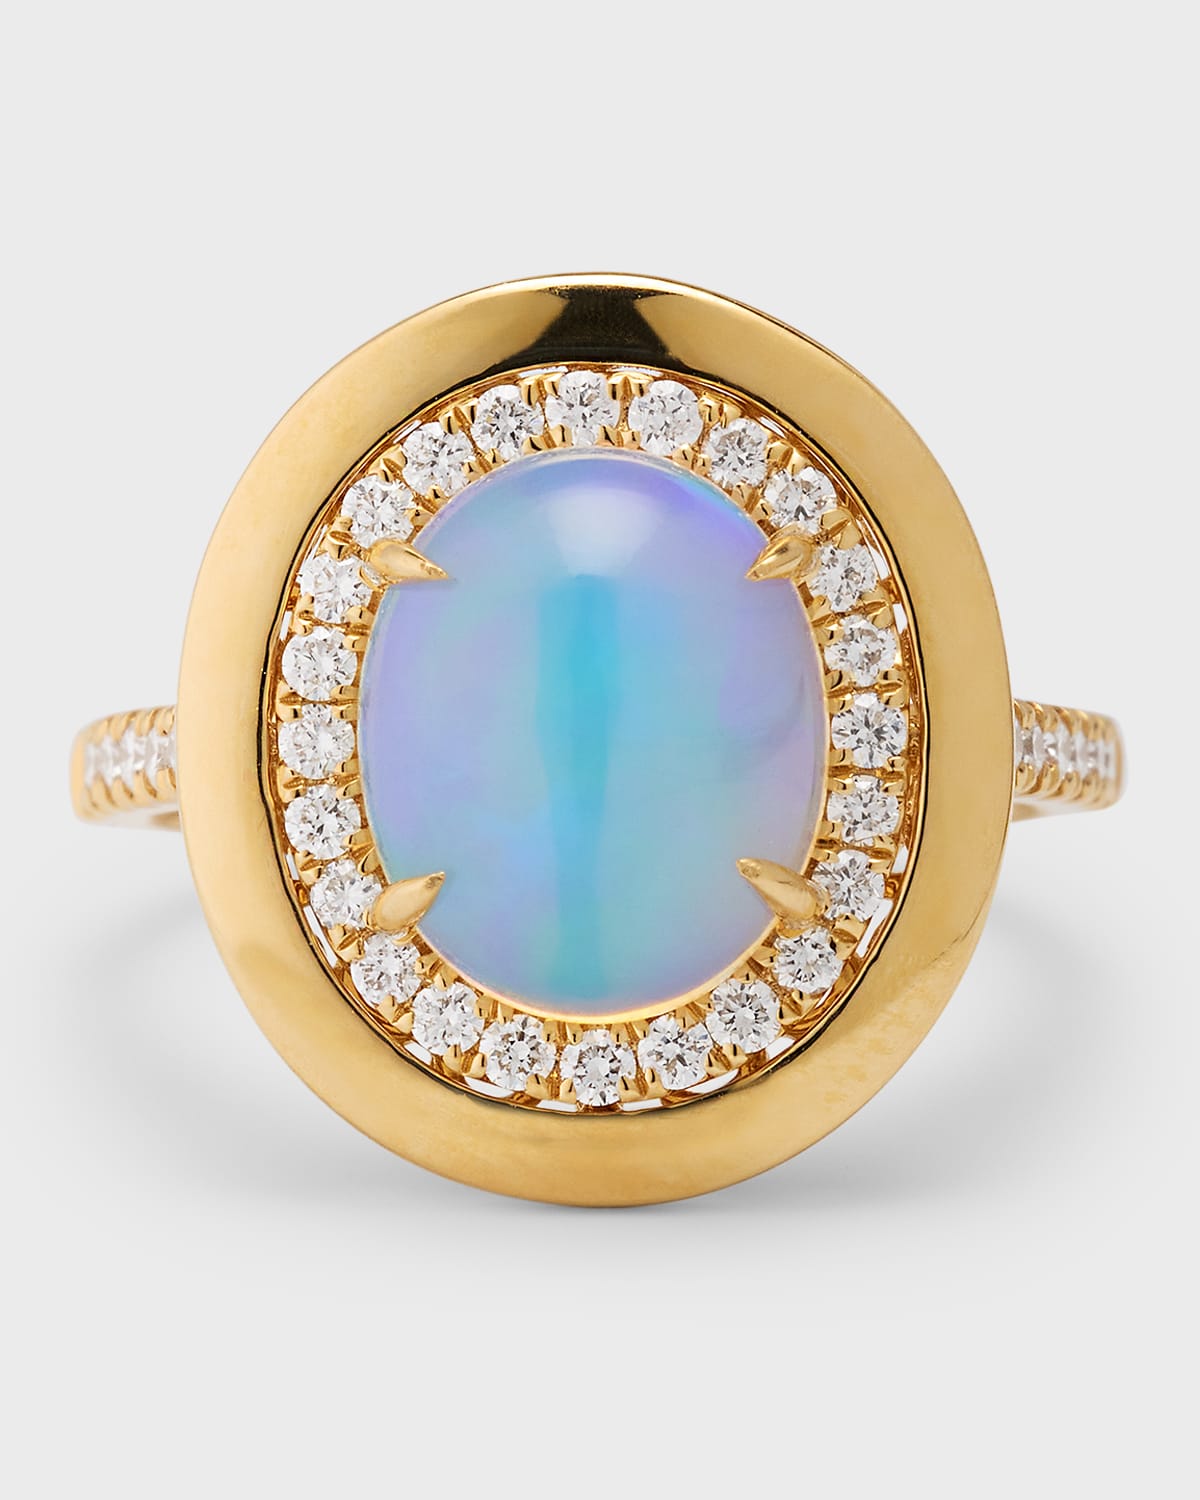 18K Yellow Gold Ring with Oval Opal and Diamonds, Size 7, 2.37tcw